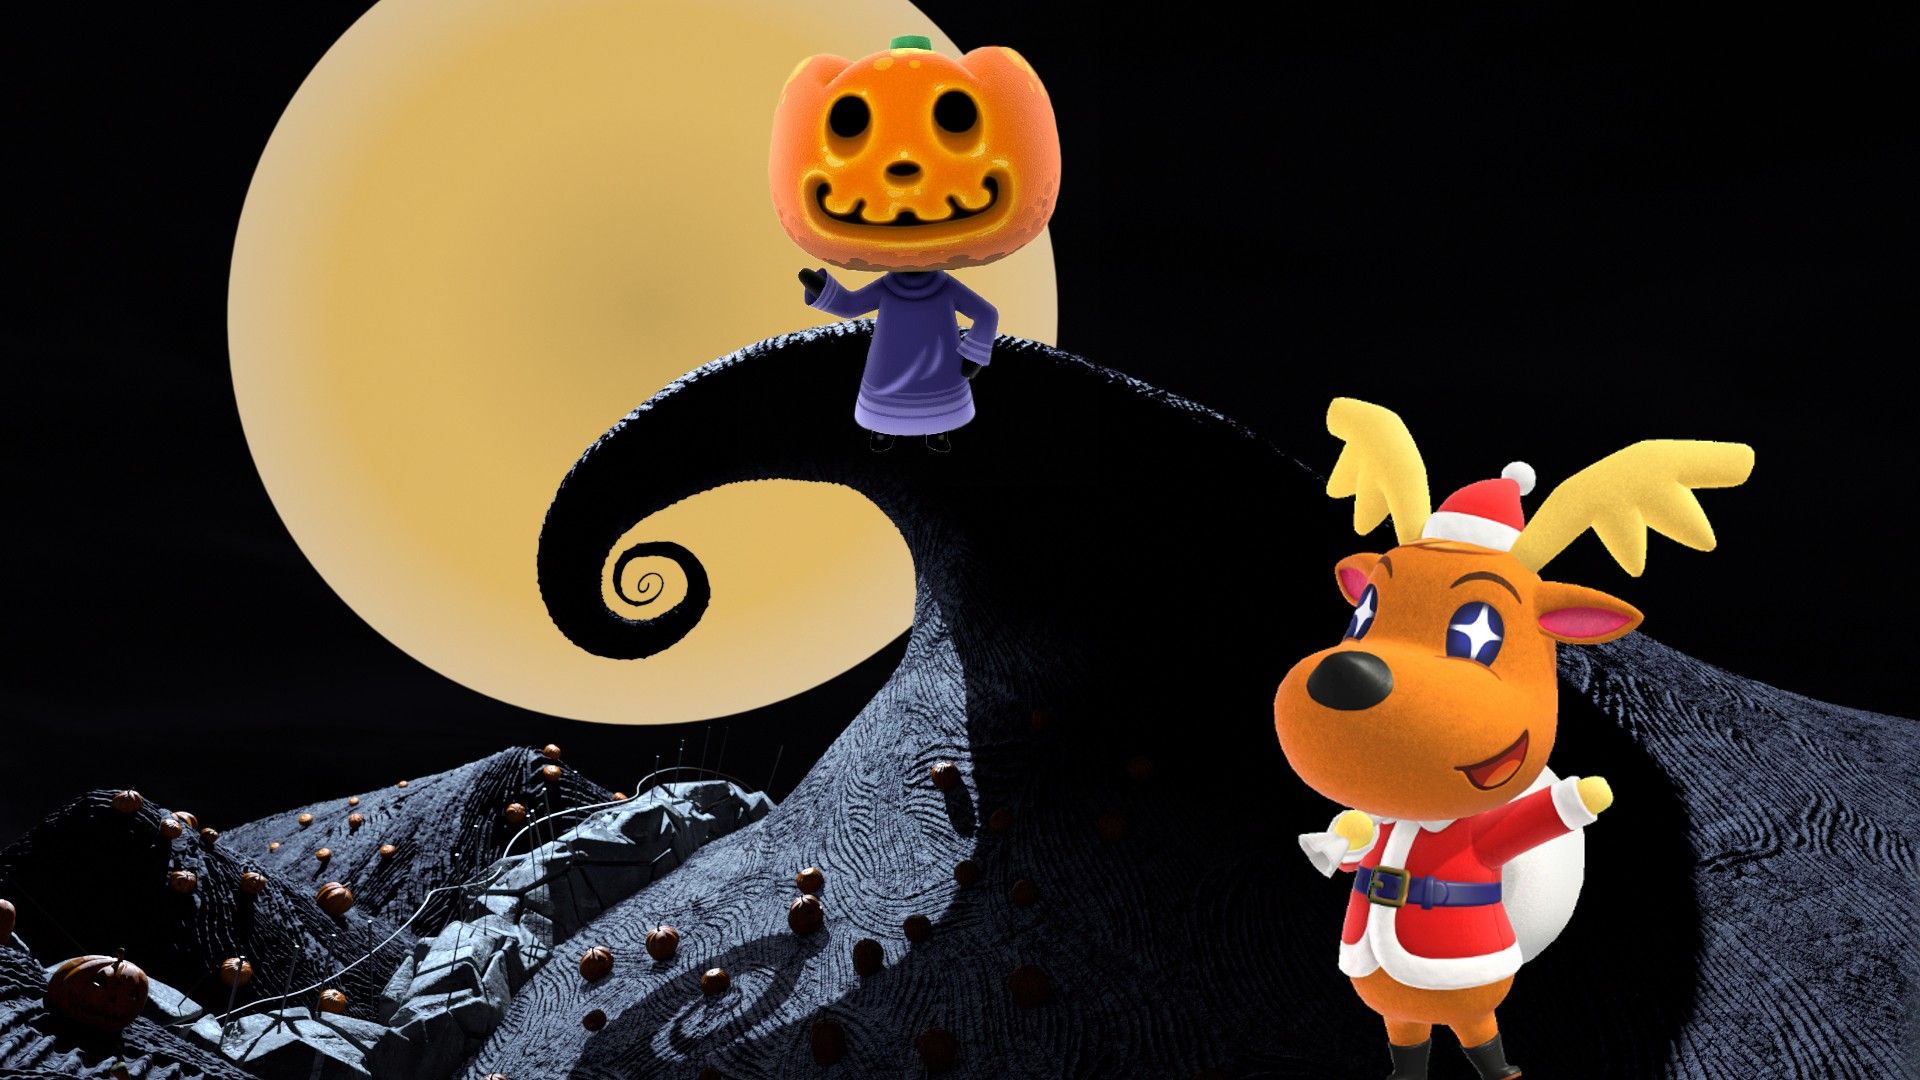 Holiday decorations can be combined to make a The Nightmare Before Christmas scene in Animal Crossing.